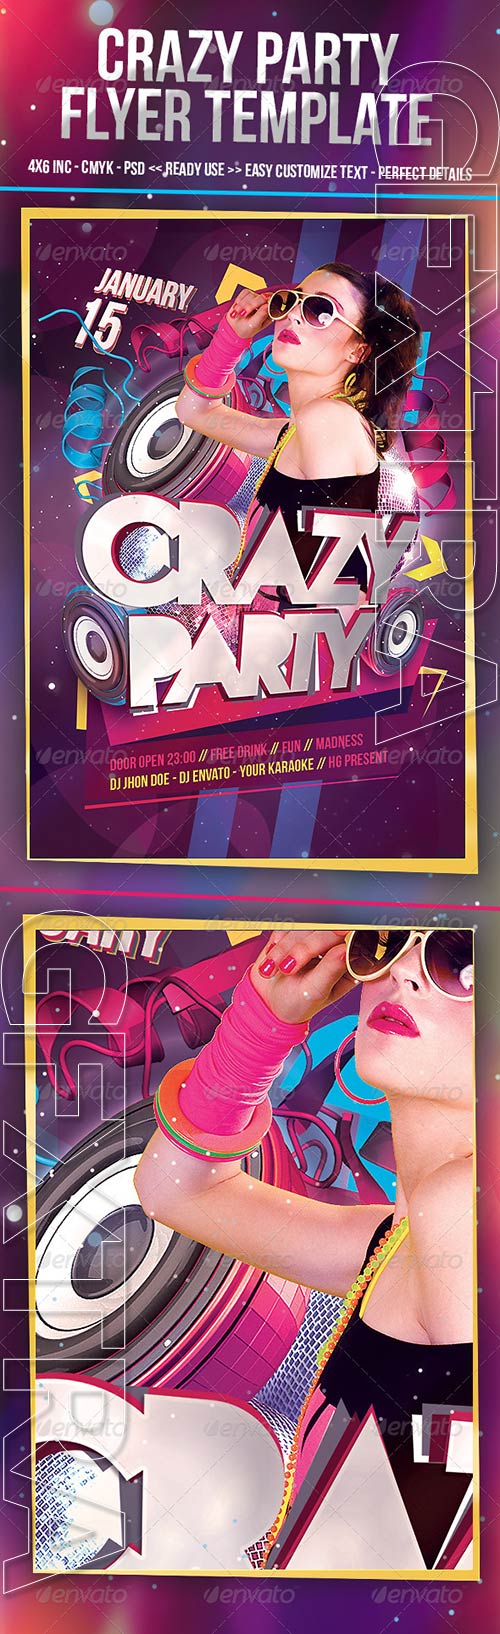 GraphicRiver - Crazy Party Flyer Template